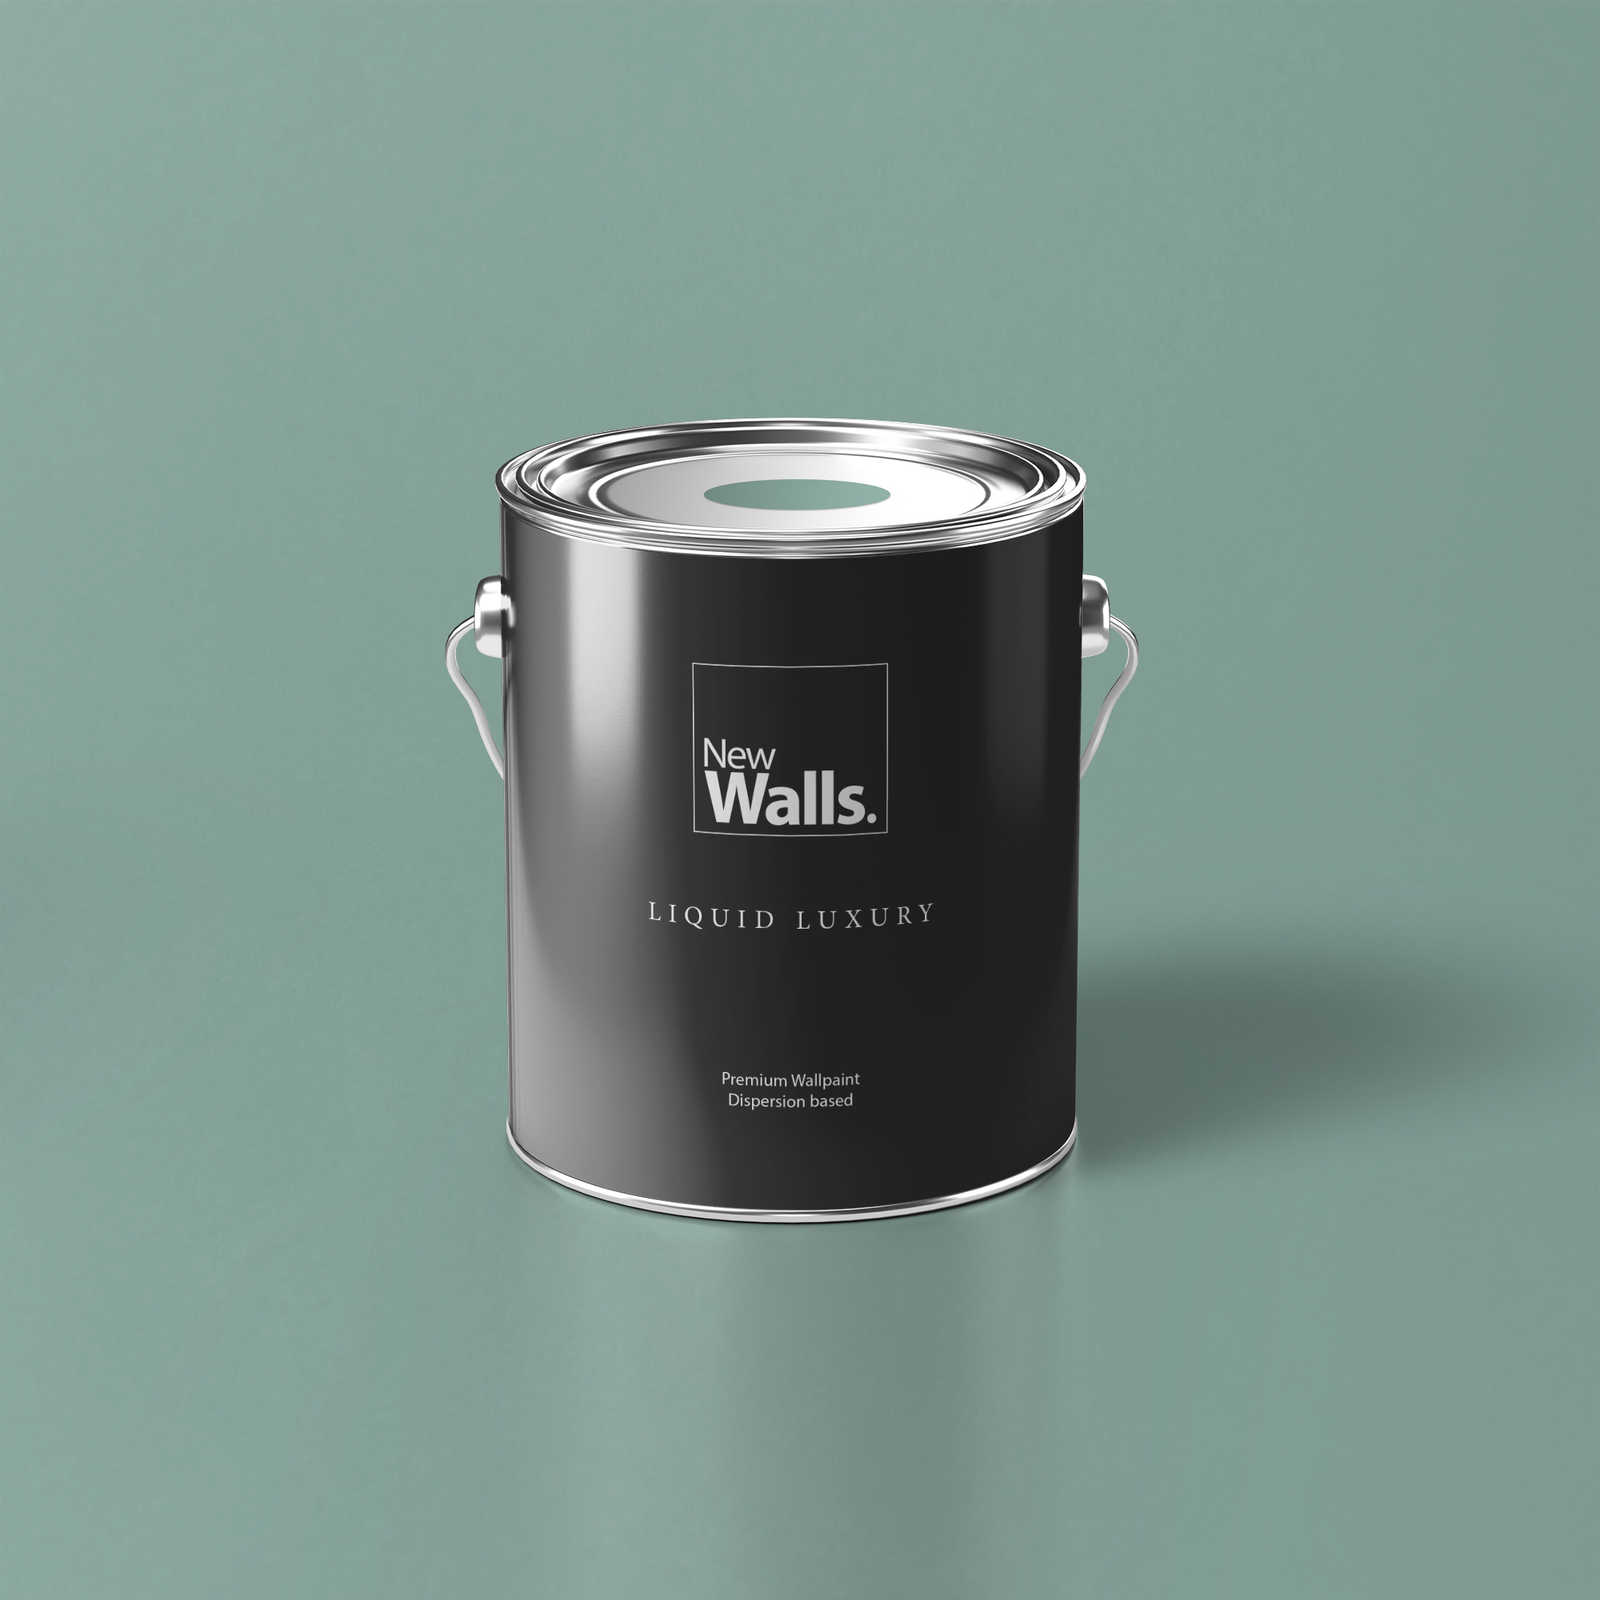 Premium Wall Paint Friendly Jade Green »Sweet Sage« NW402 – 5 litre
